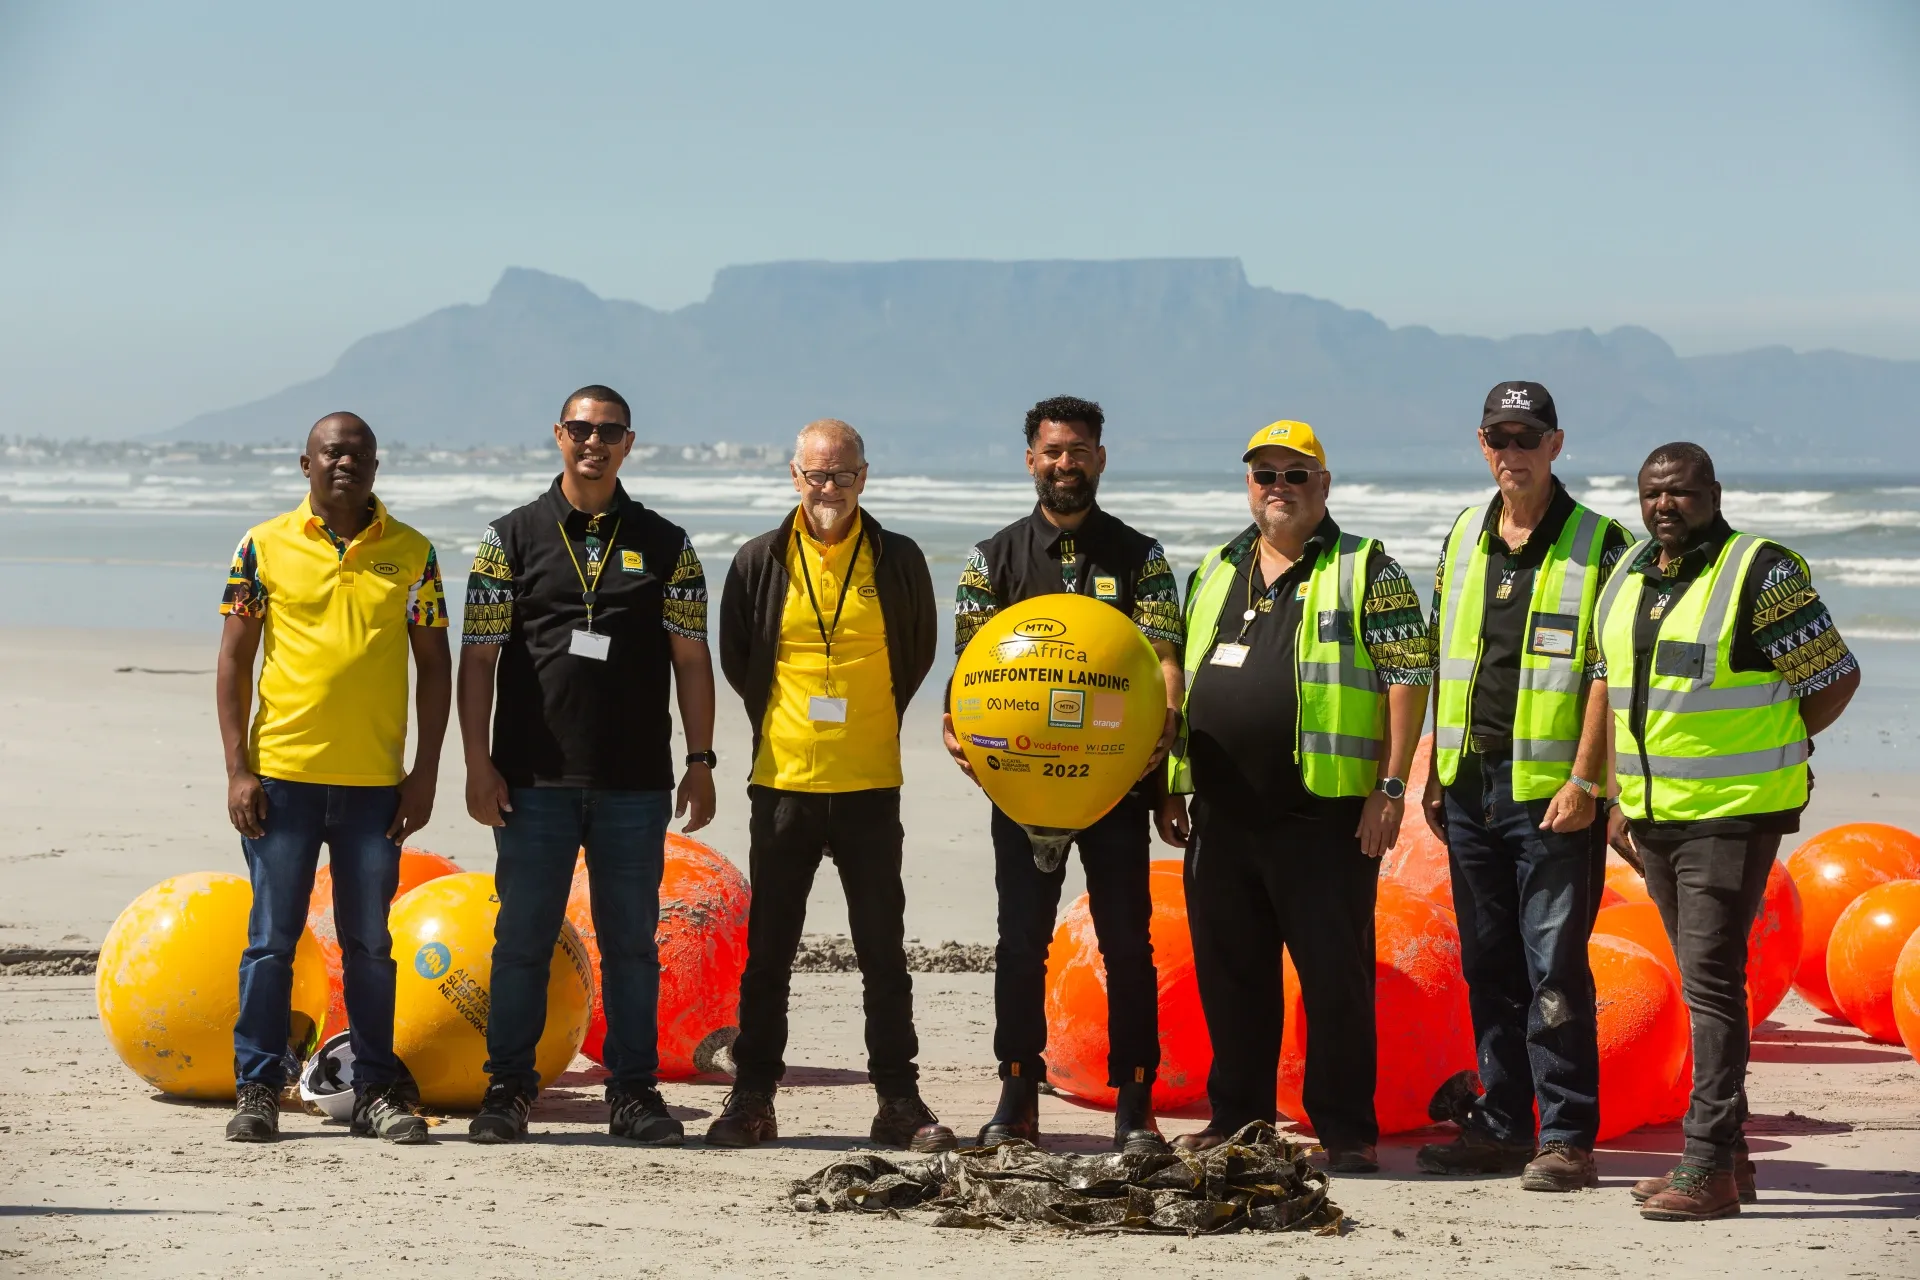 2Africa subsea cable lands in South Africa to boost internet connectivity